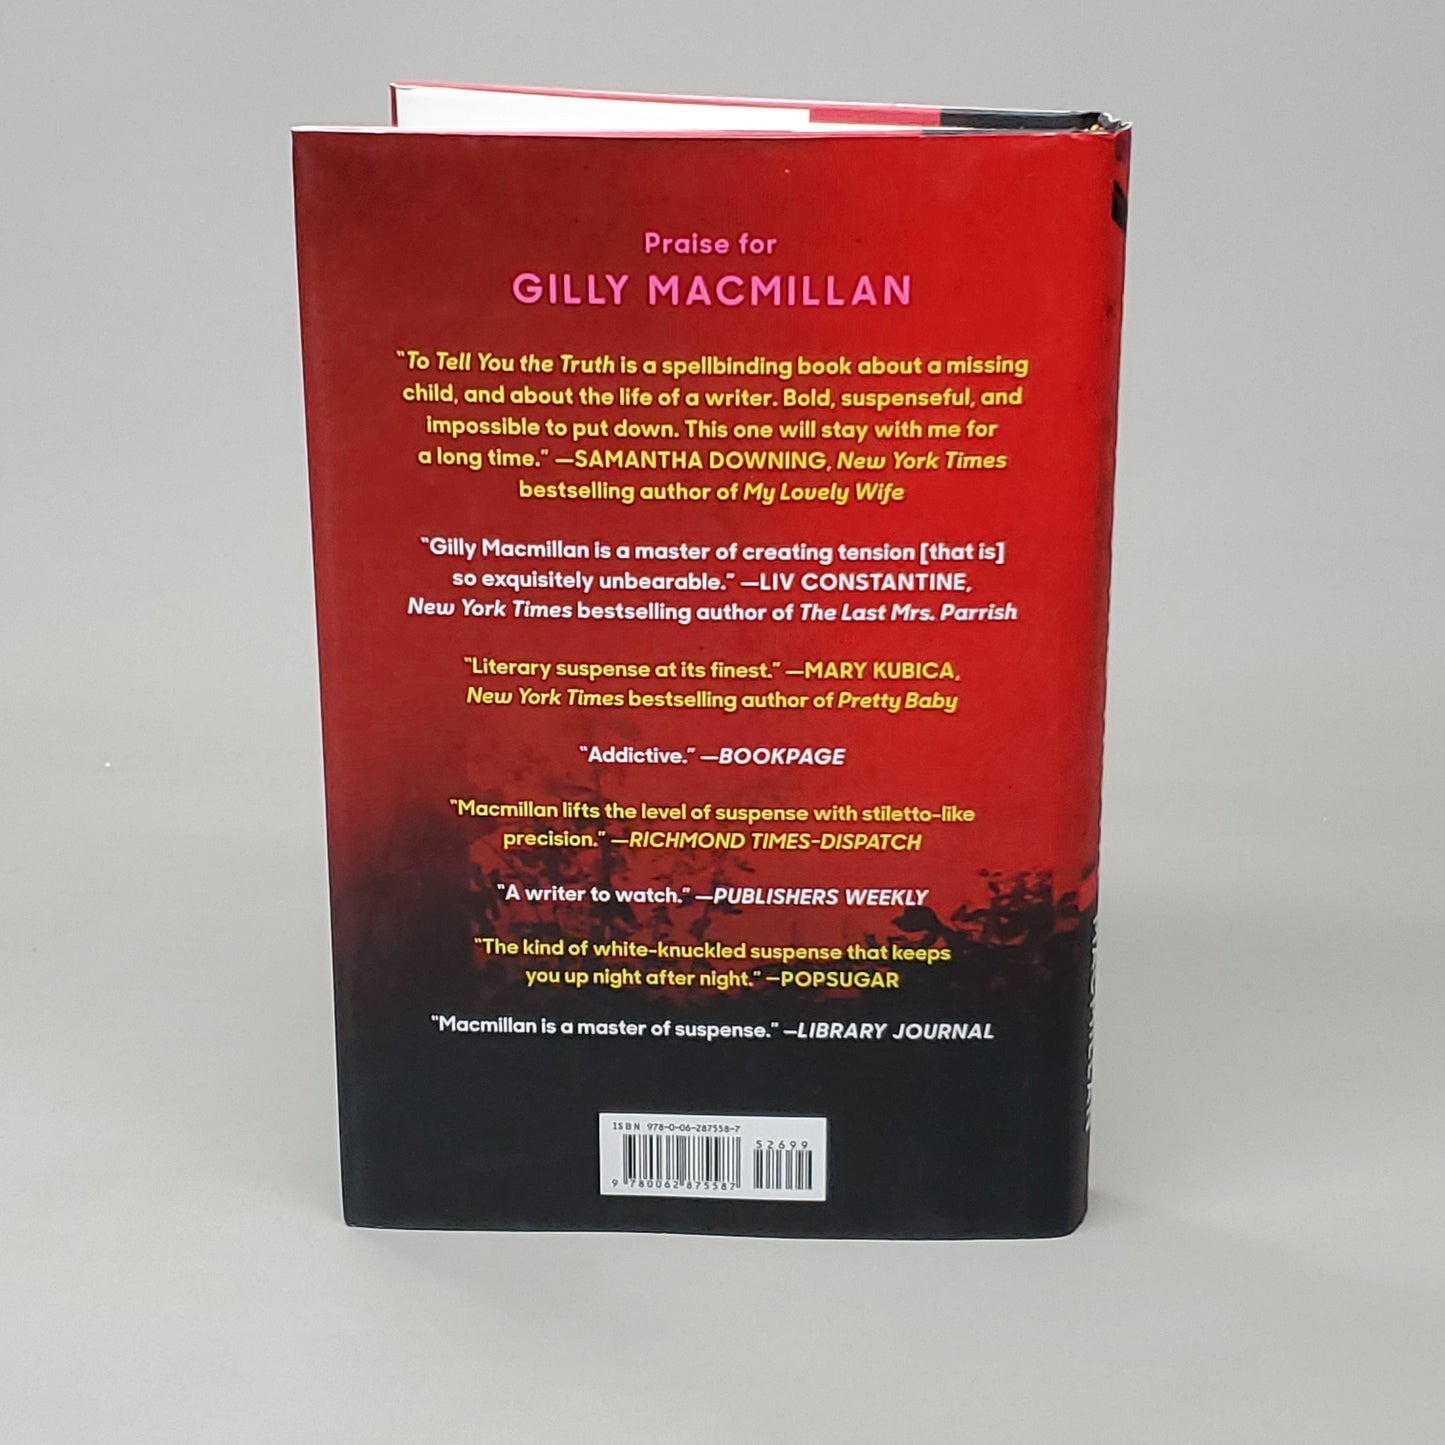 TO TELL YOU THE TRUTH by Gilly Macmillan Book Hardback (New)